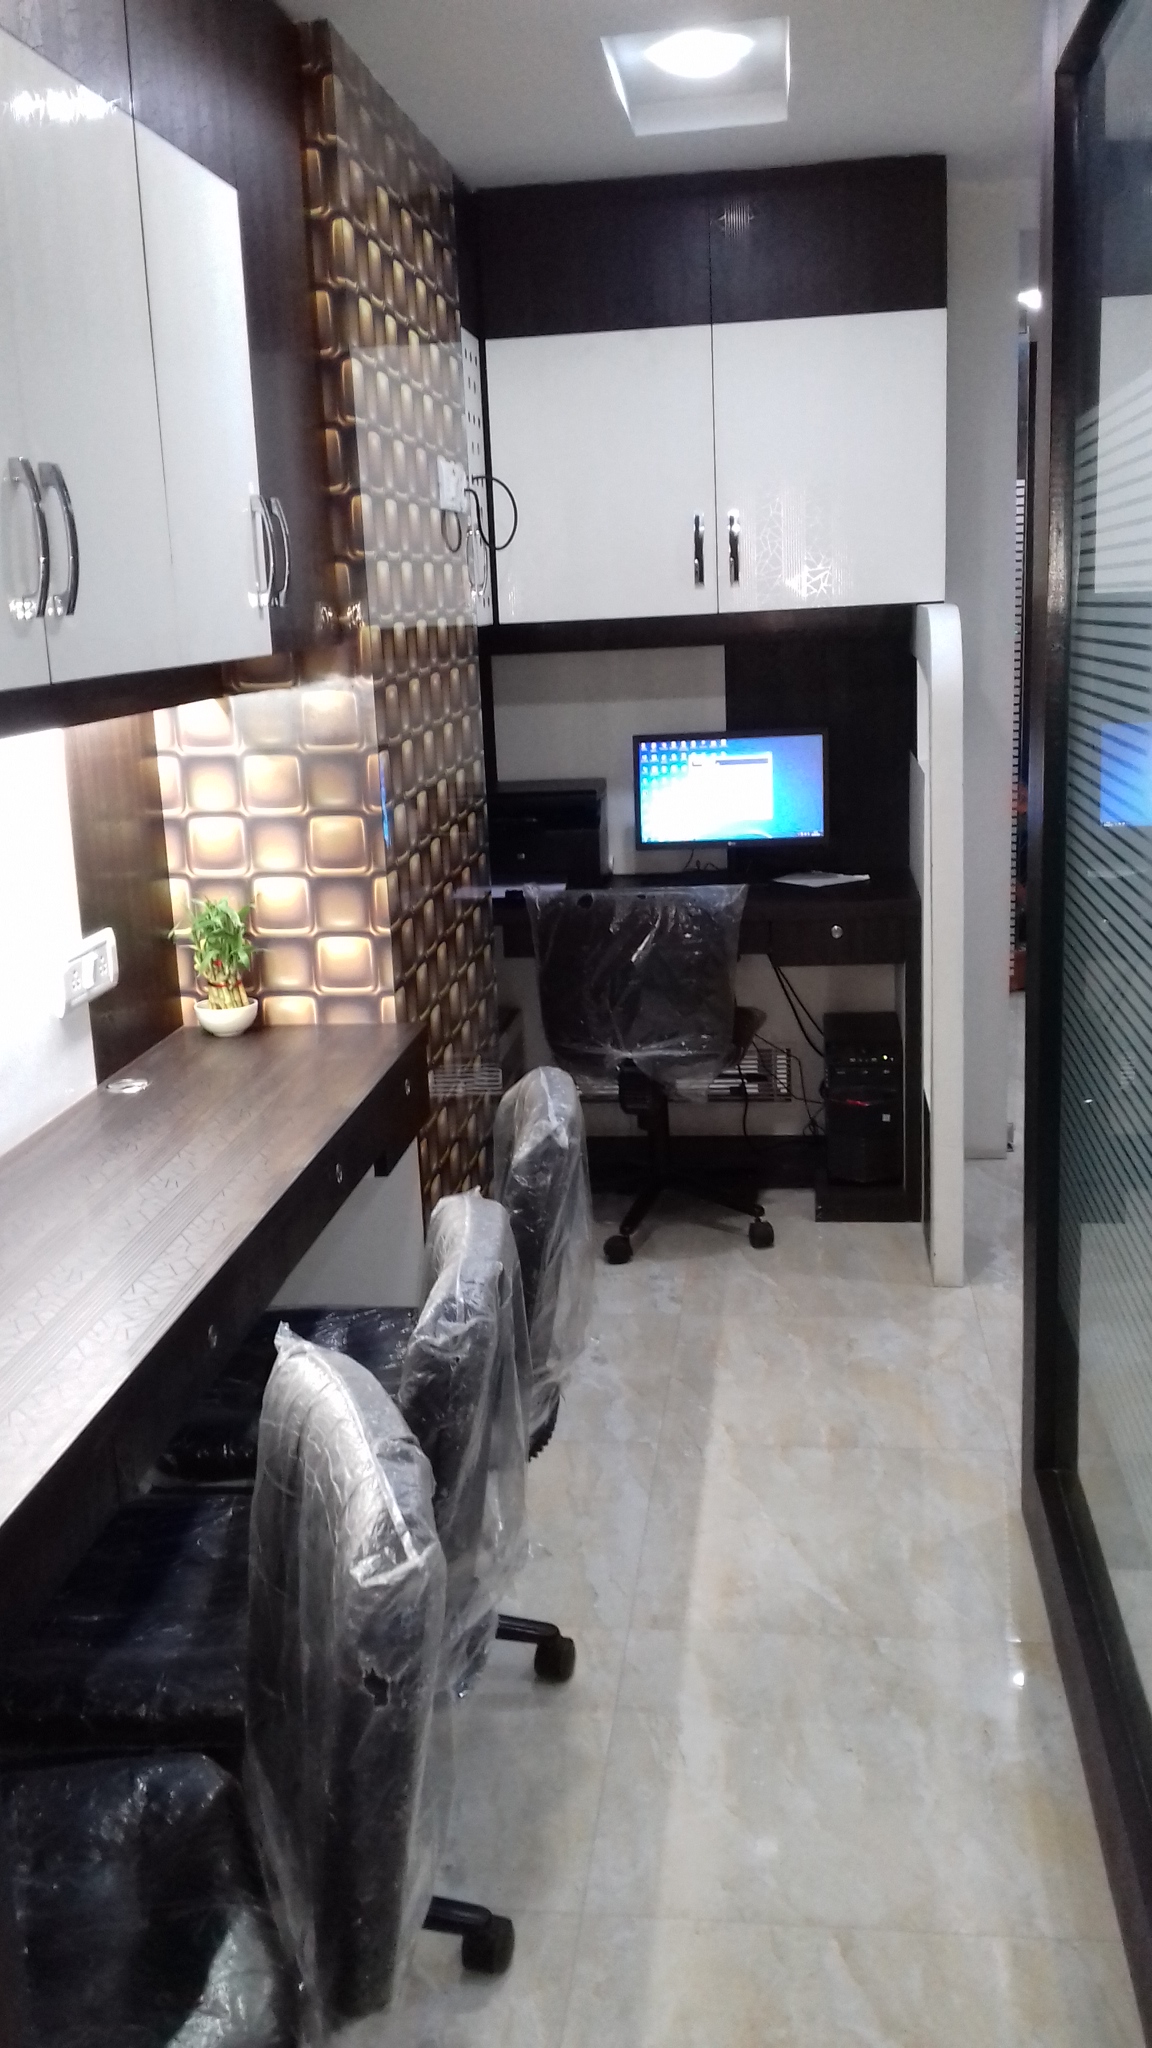 Office For Rent in Nager Bazar Kolkata (ID: 19183)